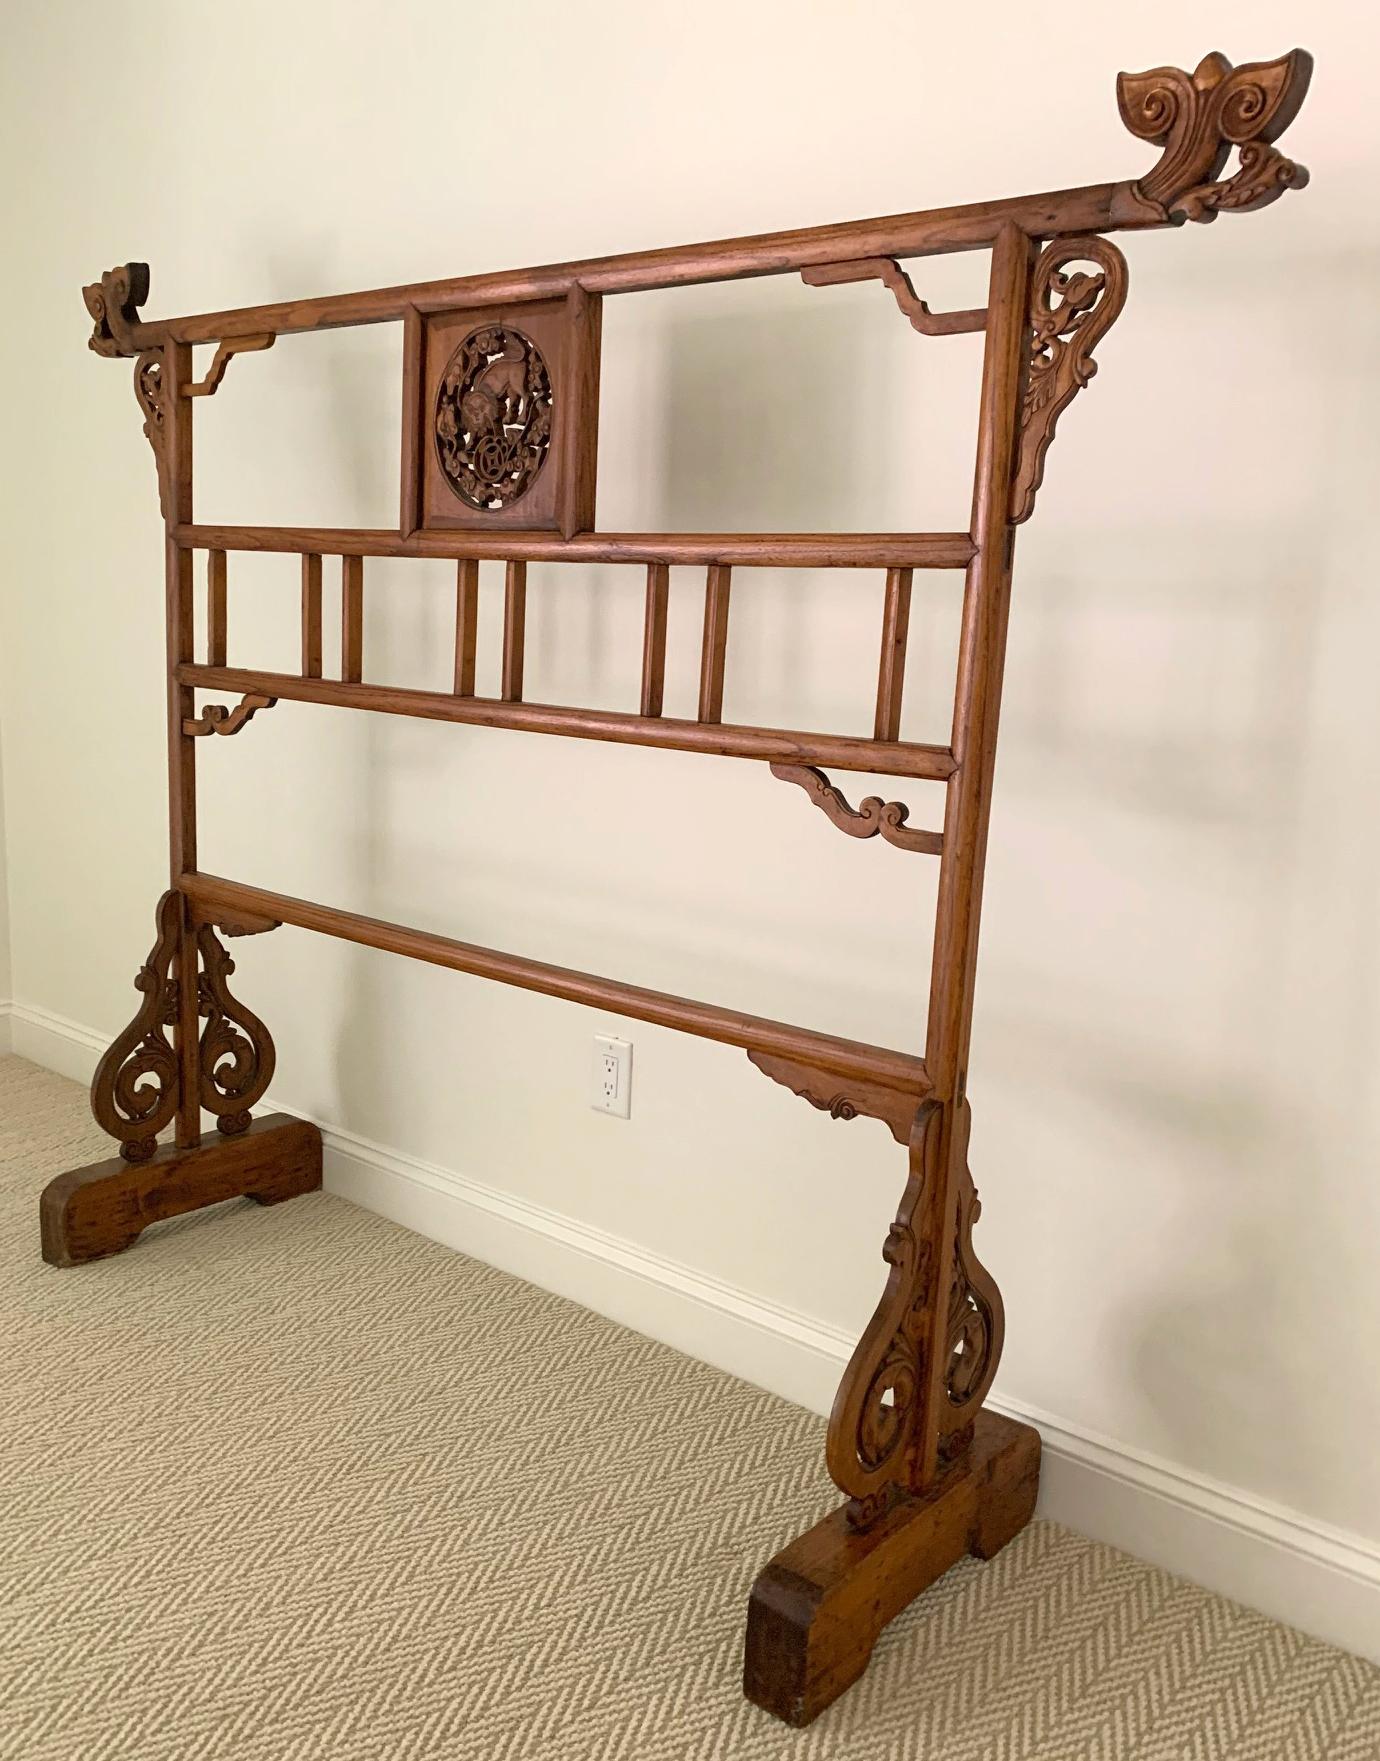 A large garment or robe rack from Northern China, circa first half of the 20th century. Made of elm wood with pronounced black wood grains, the rack was traditional used to display large garment and robes, and often service as a screen as well. The